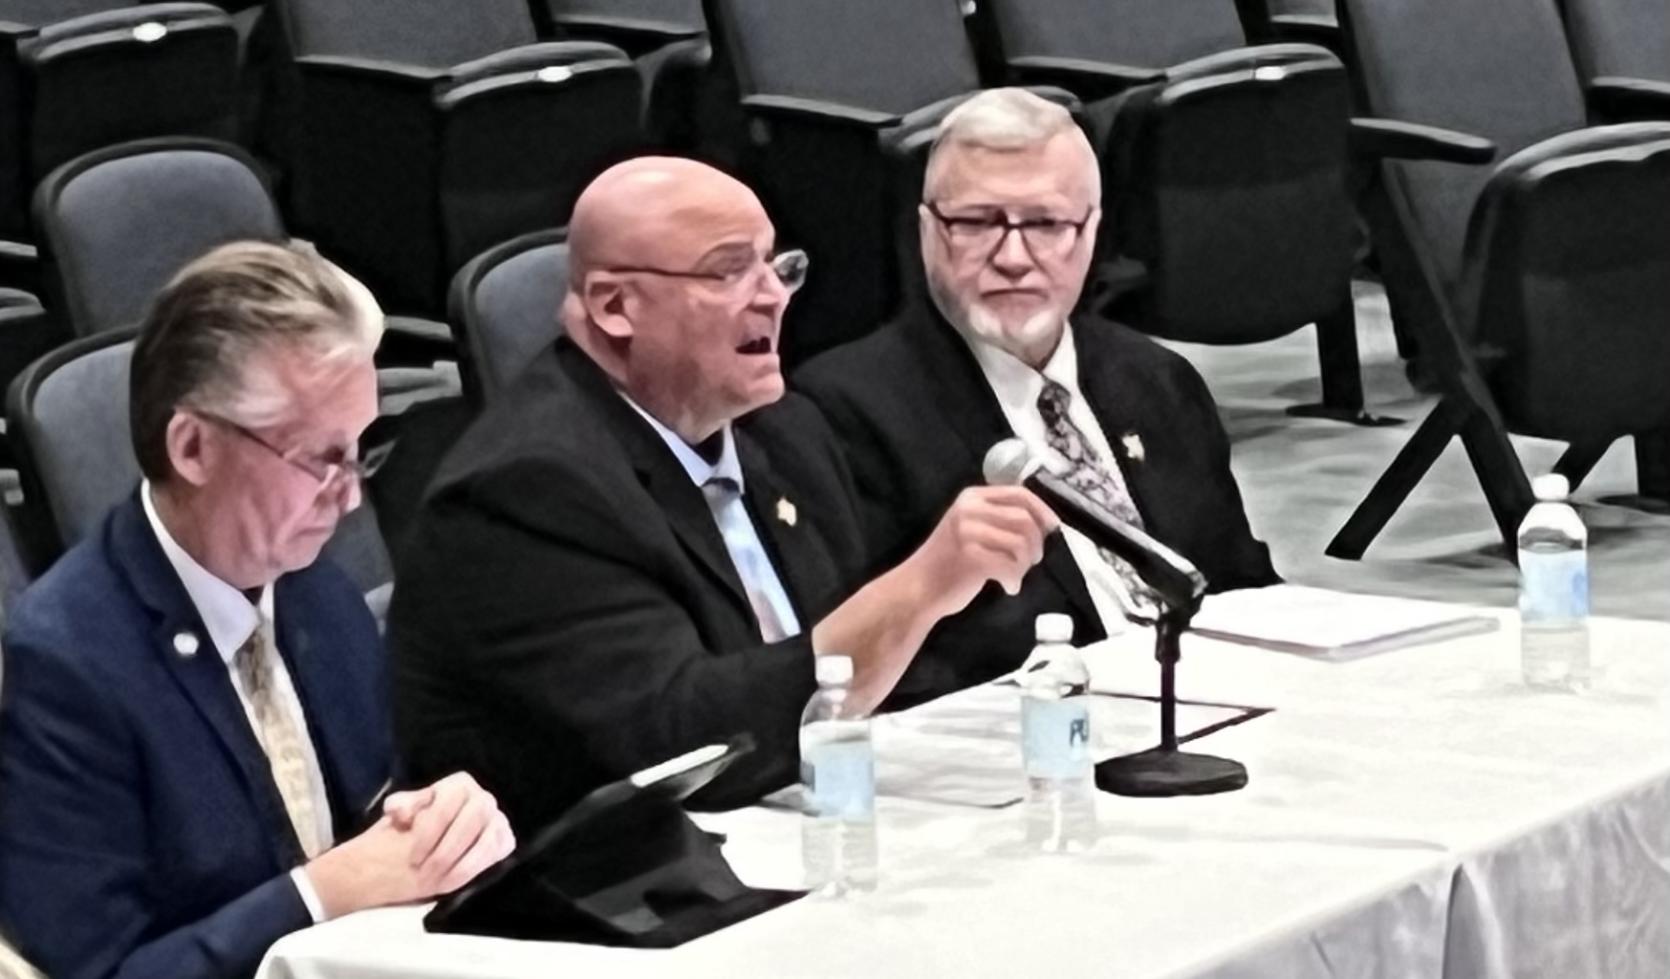 Norfolk County Sheriff Patrick McDermott (left), Hampden County Sheriff Nicholas Cocchi (center), and Hampshire County Sheriff Patrick Cahillane (right) testified at the Joint Ways and Means FY25 Budget Hearing.